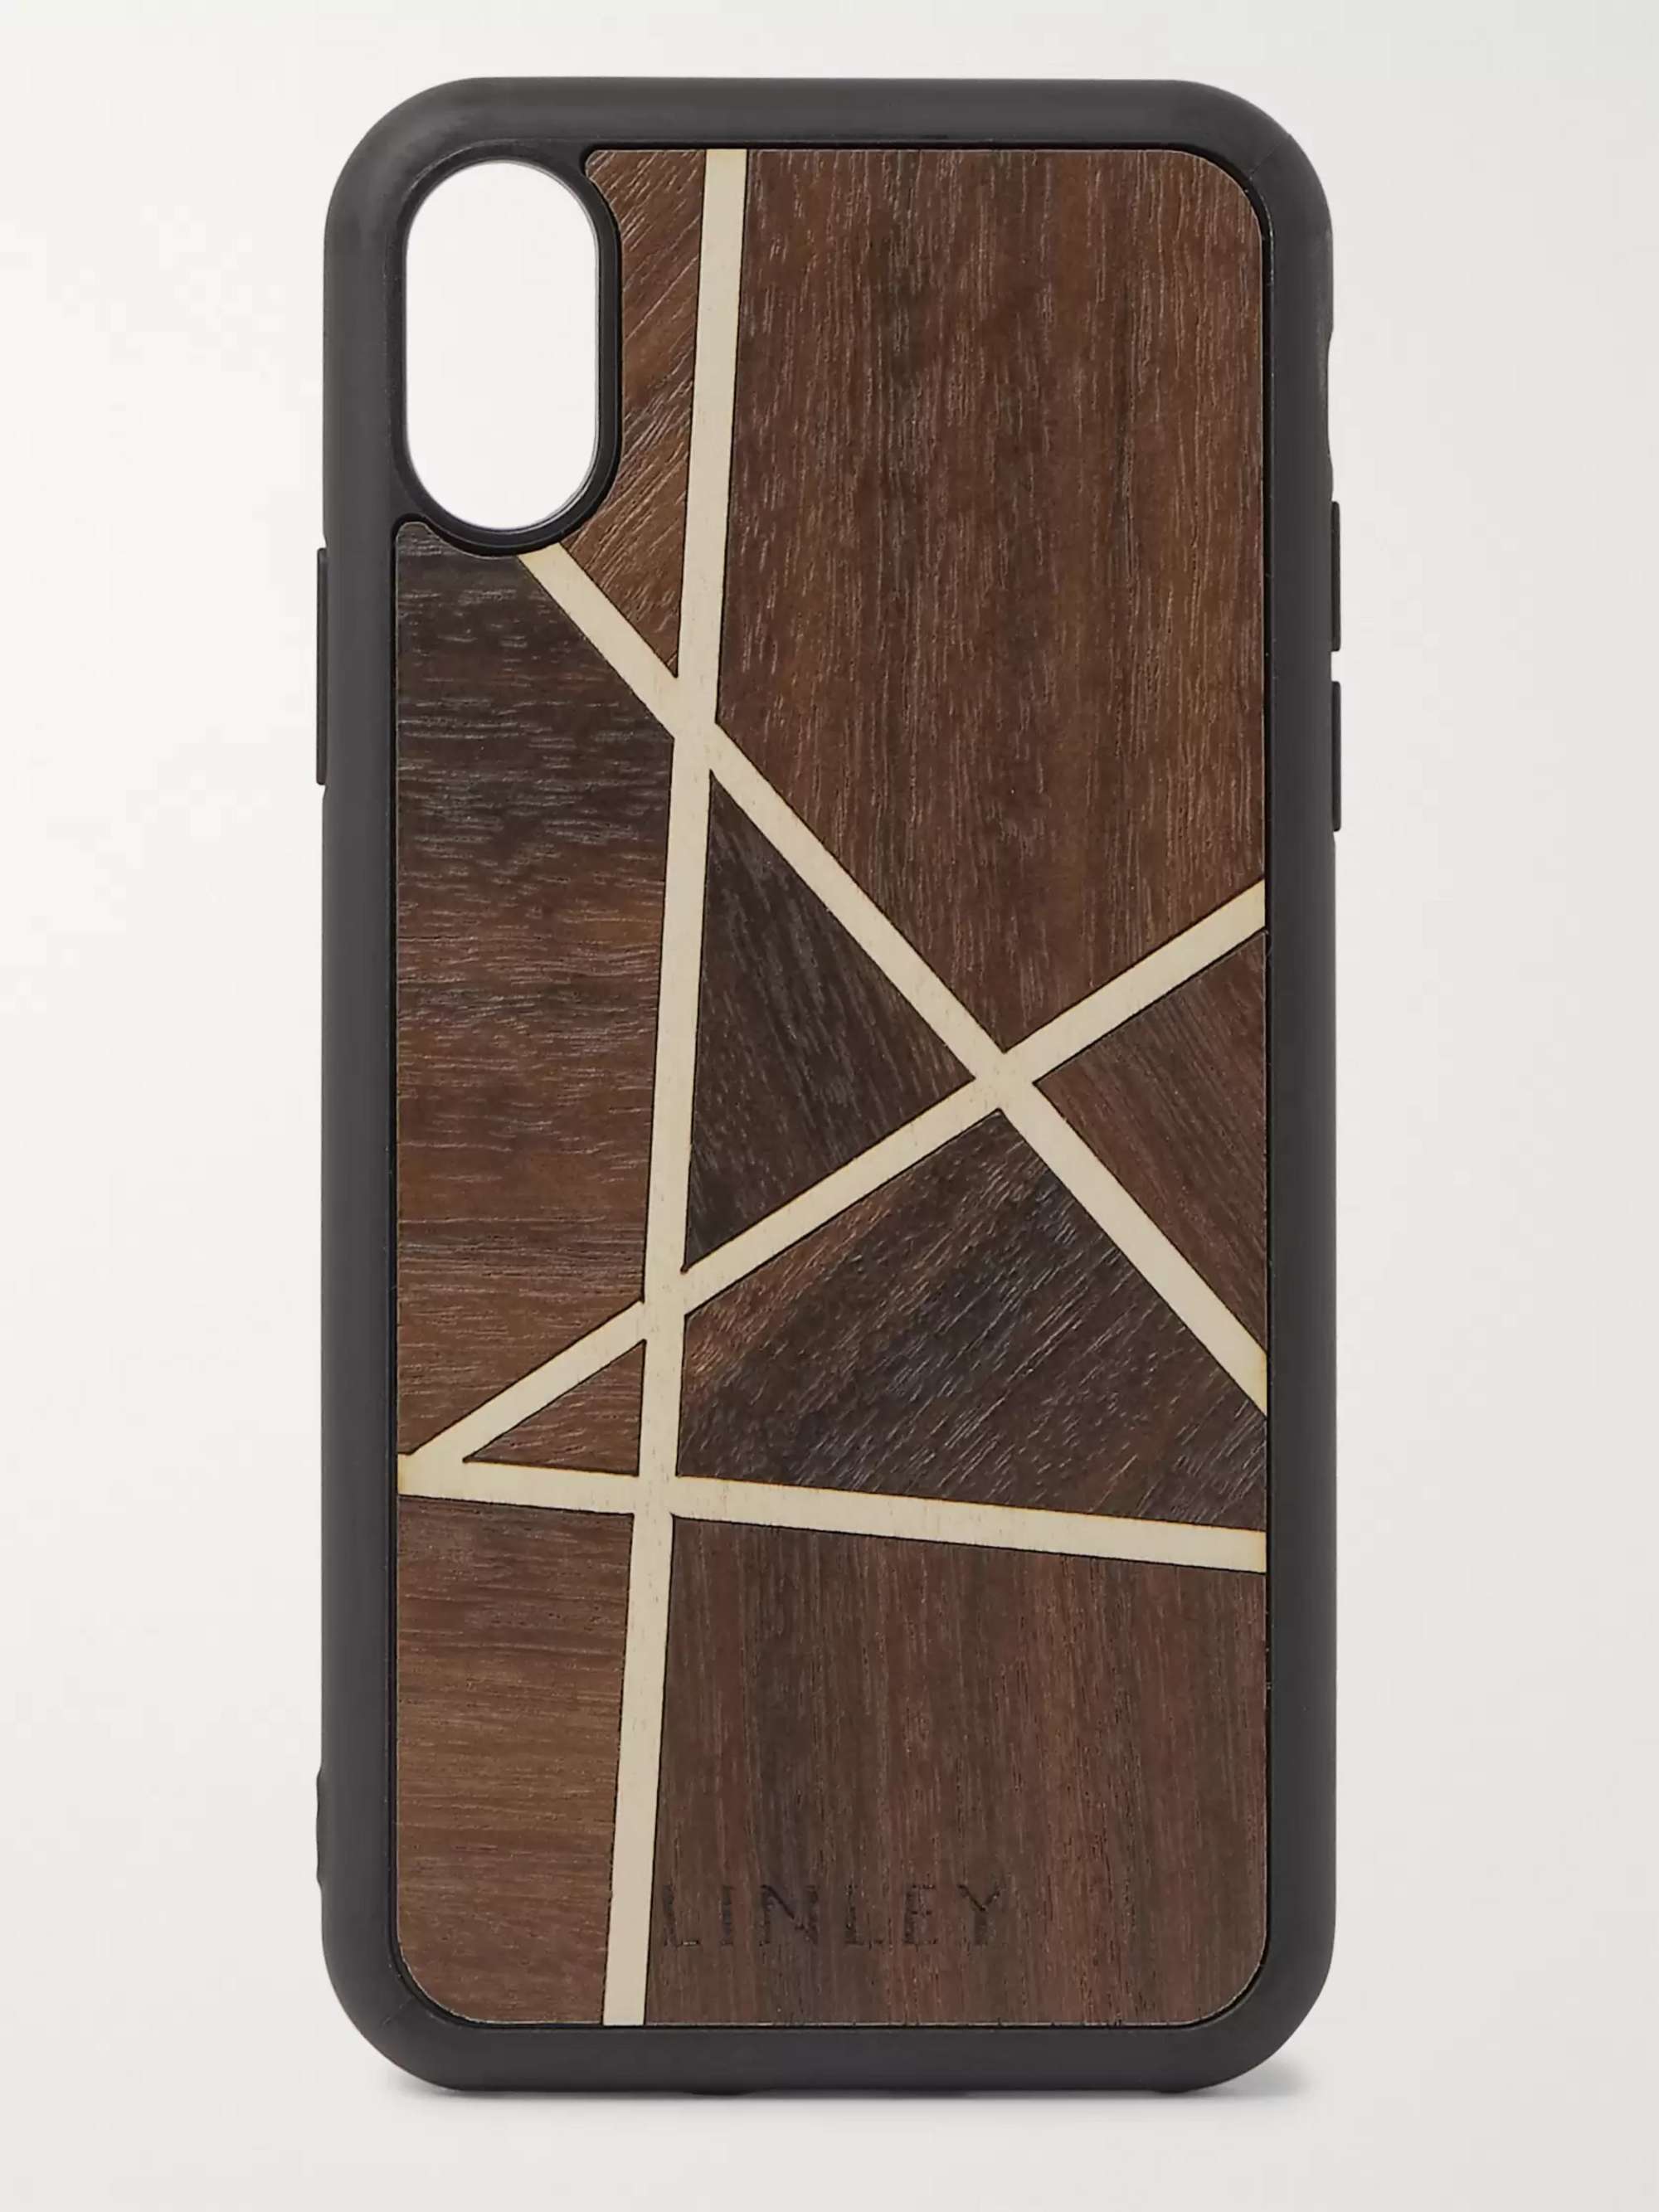 LINLEY Rubber-Trimmed Macassar and Sycamore iPhone X/XS Case